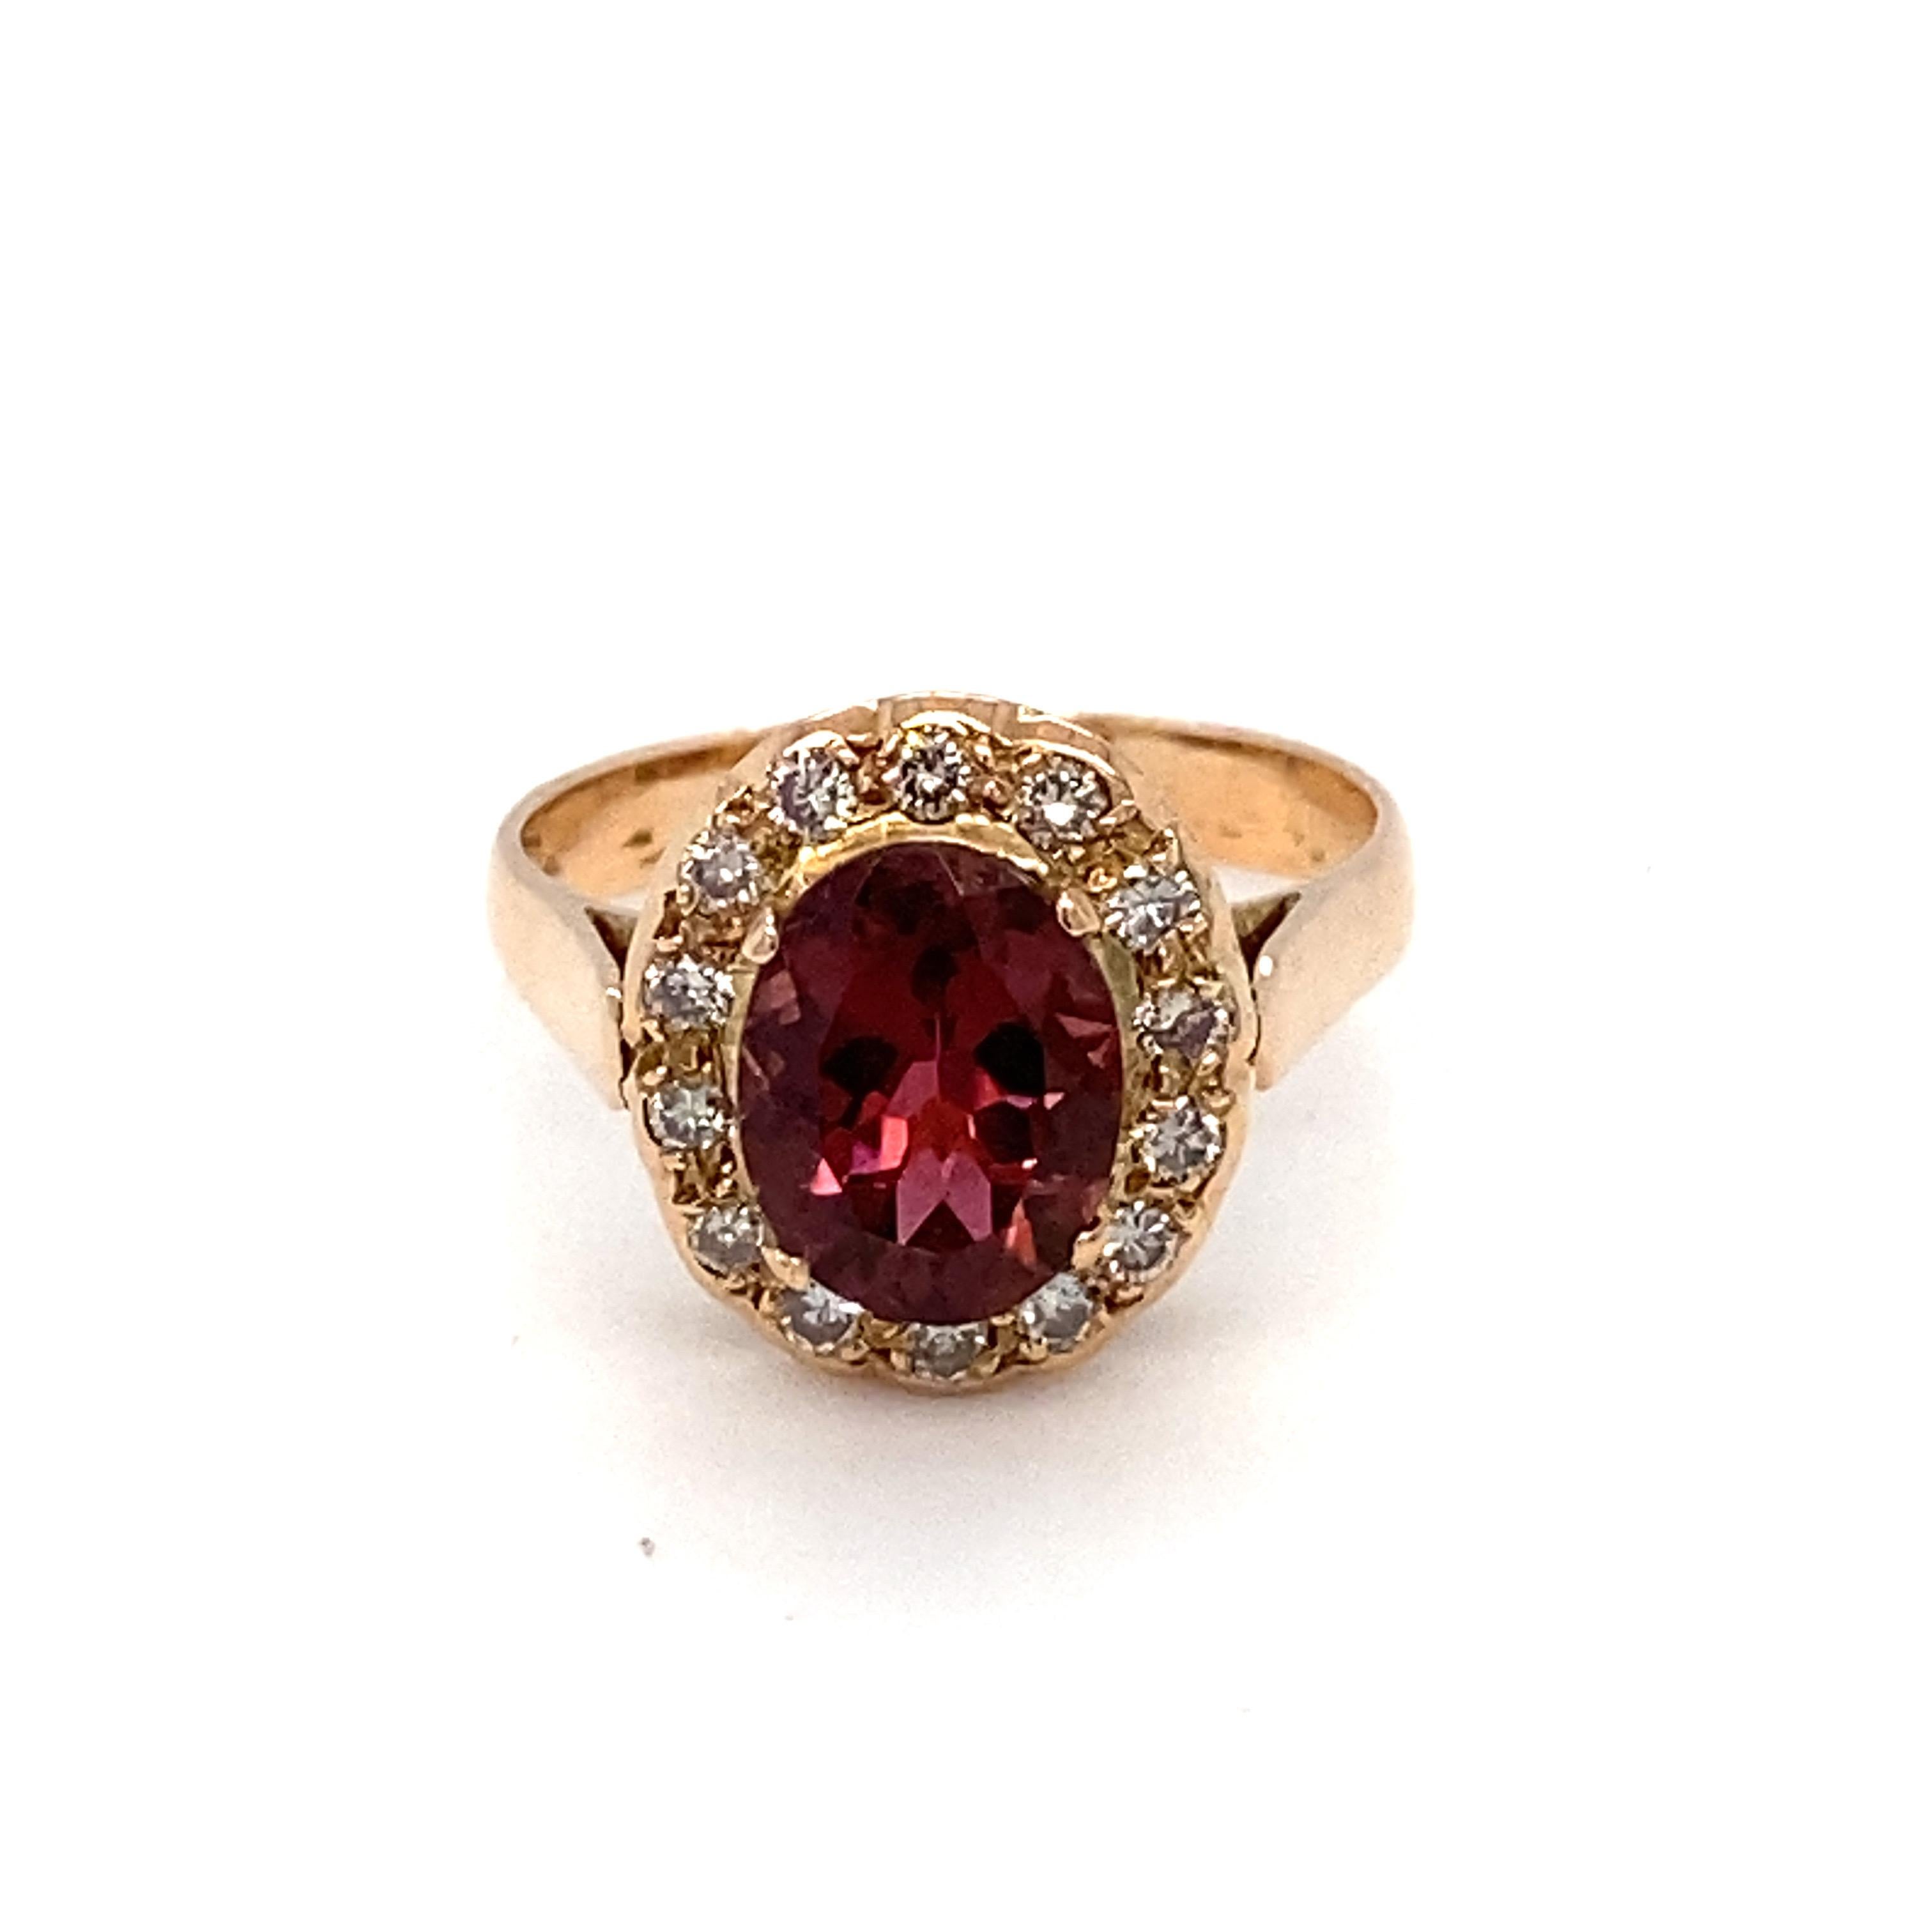 This halo ring has pink purple tourmaline as center stone surrounded with a halo of white diamonds in pave setting. Set in 14K yellow gold and is crafted with hand. Birthstone for the month of October it is perfect for everyday wear. Size is 6